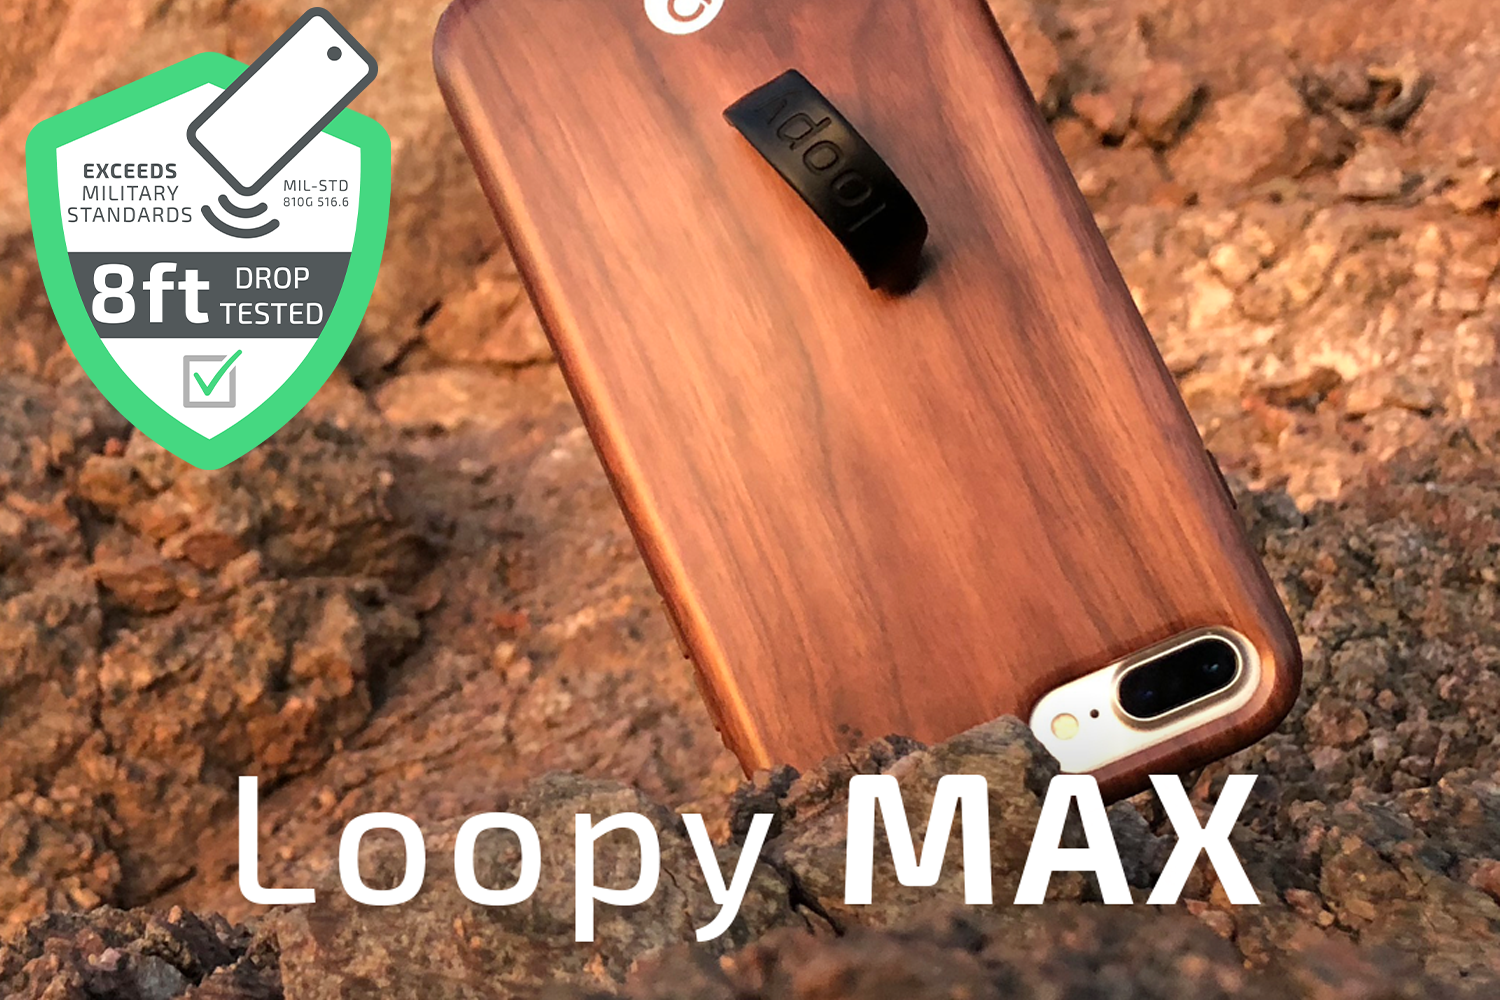 Loopy MAX iPhone 6 PLUS, 7 PLUS, and 8 PLUS